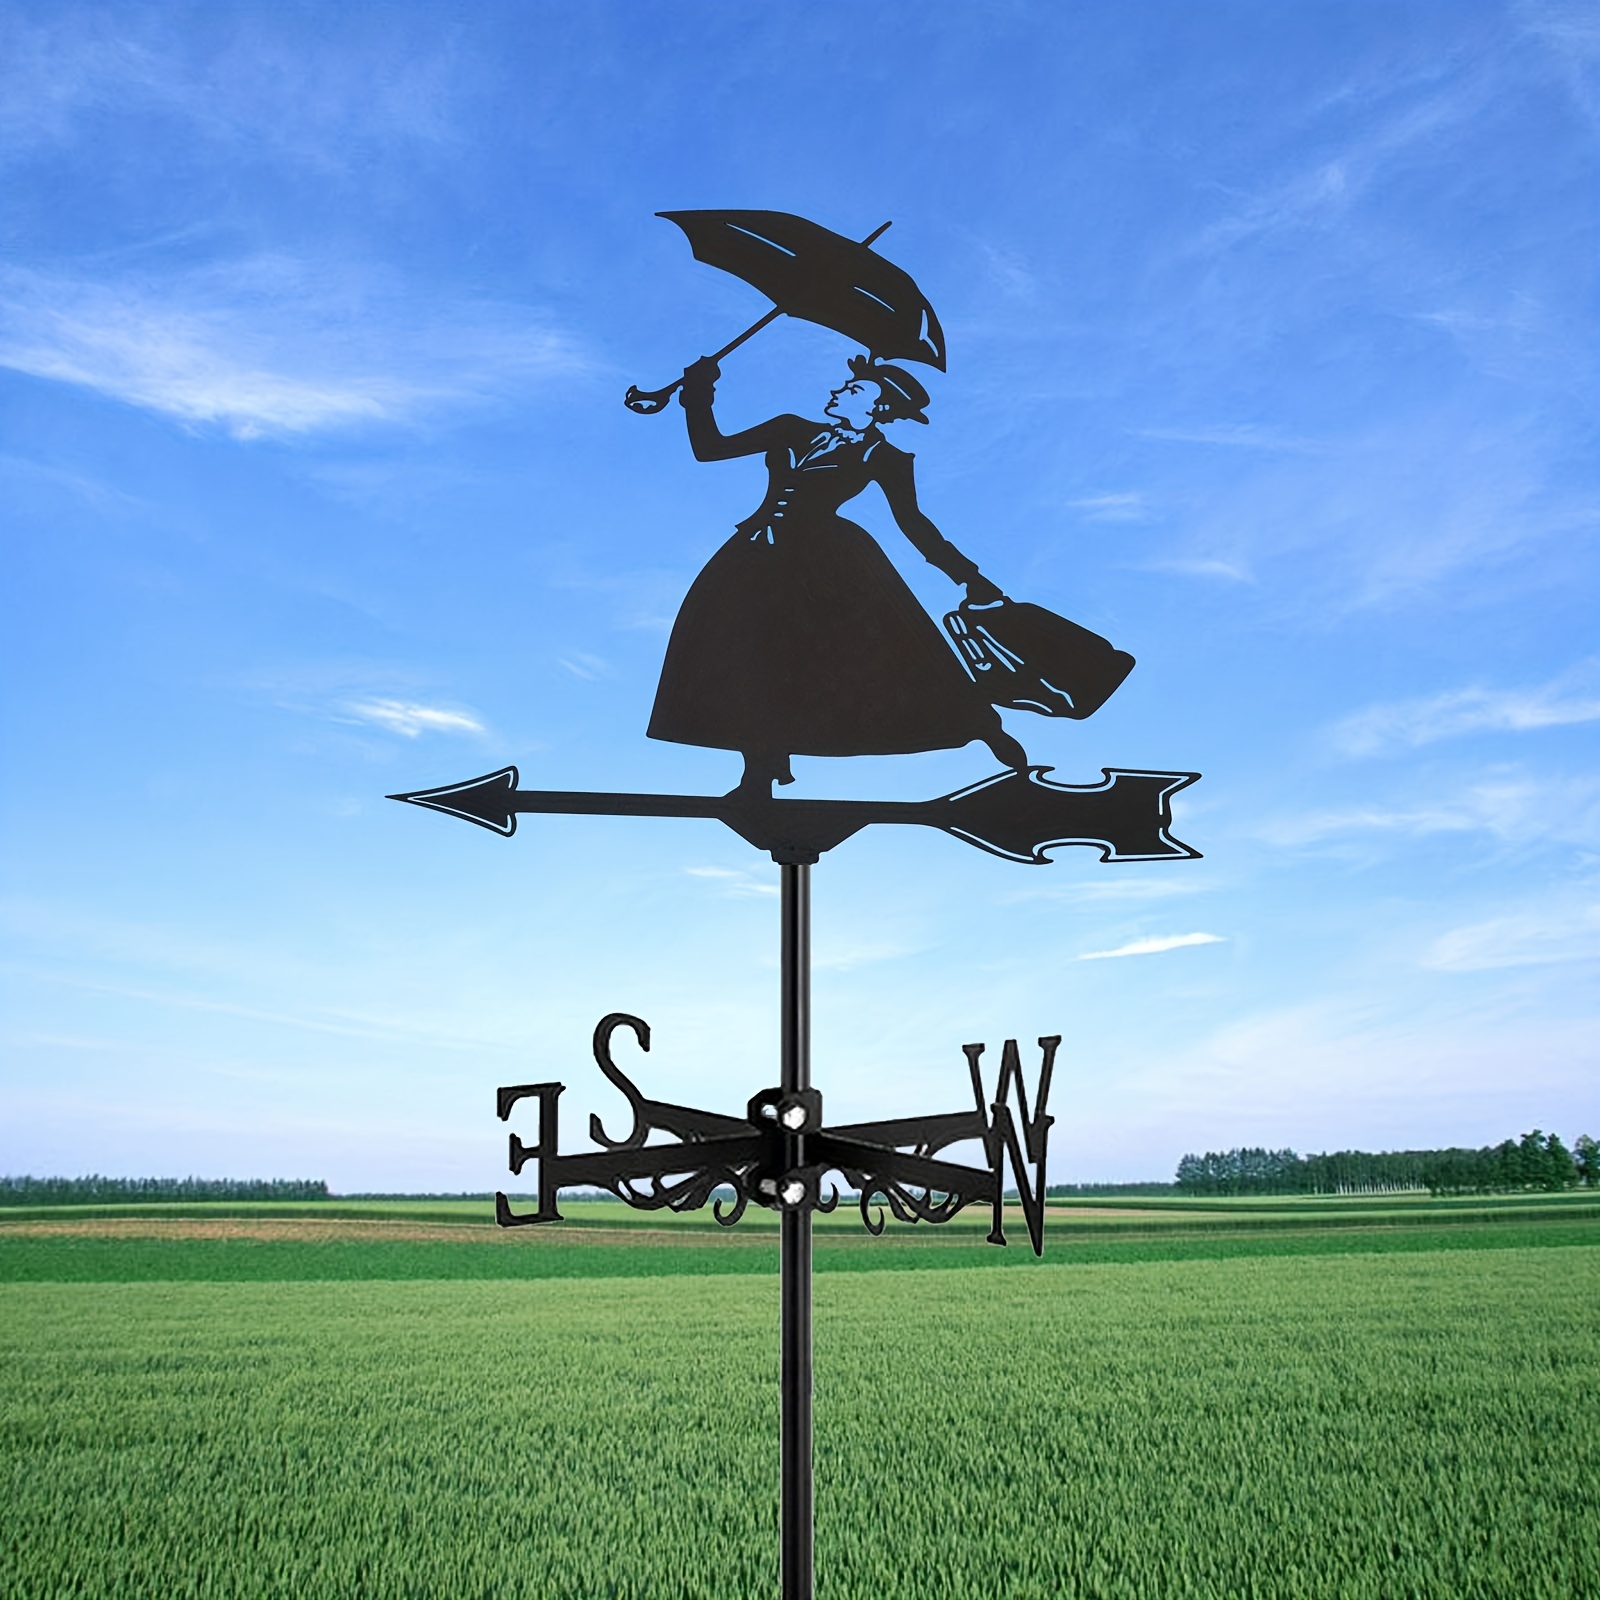 

1pc, New Metal Umbrella Lady Weather Vane, Standing Decor Roof Weather Vane Garden Yard Decoration For Roof Garden, Garden Shed, Home, Fence Post, Greenhouse, Barn Or Shed Weather Vane